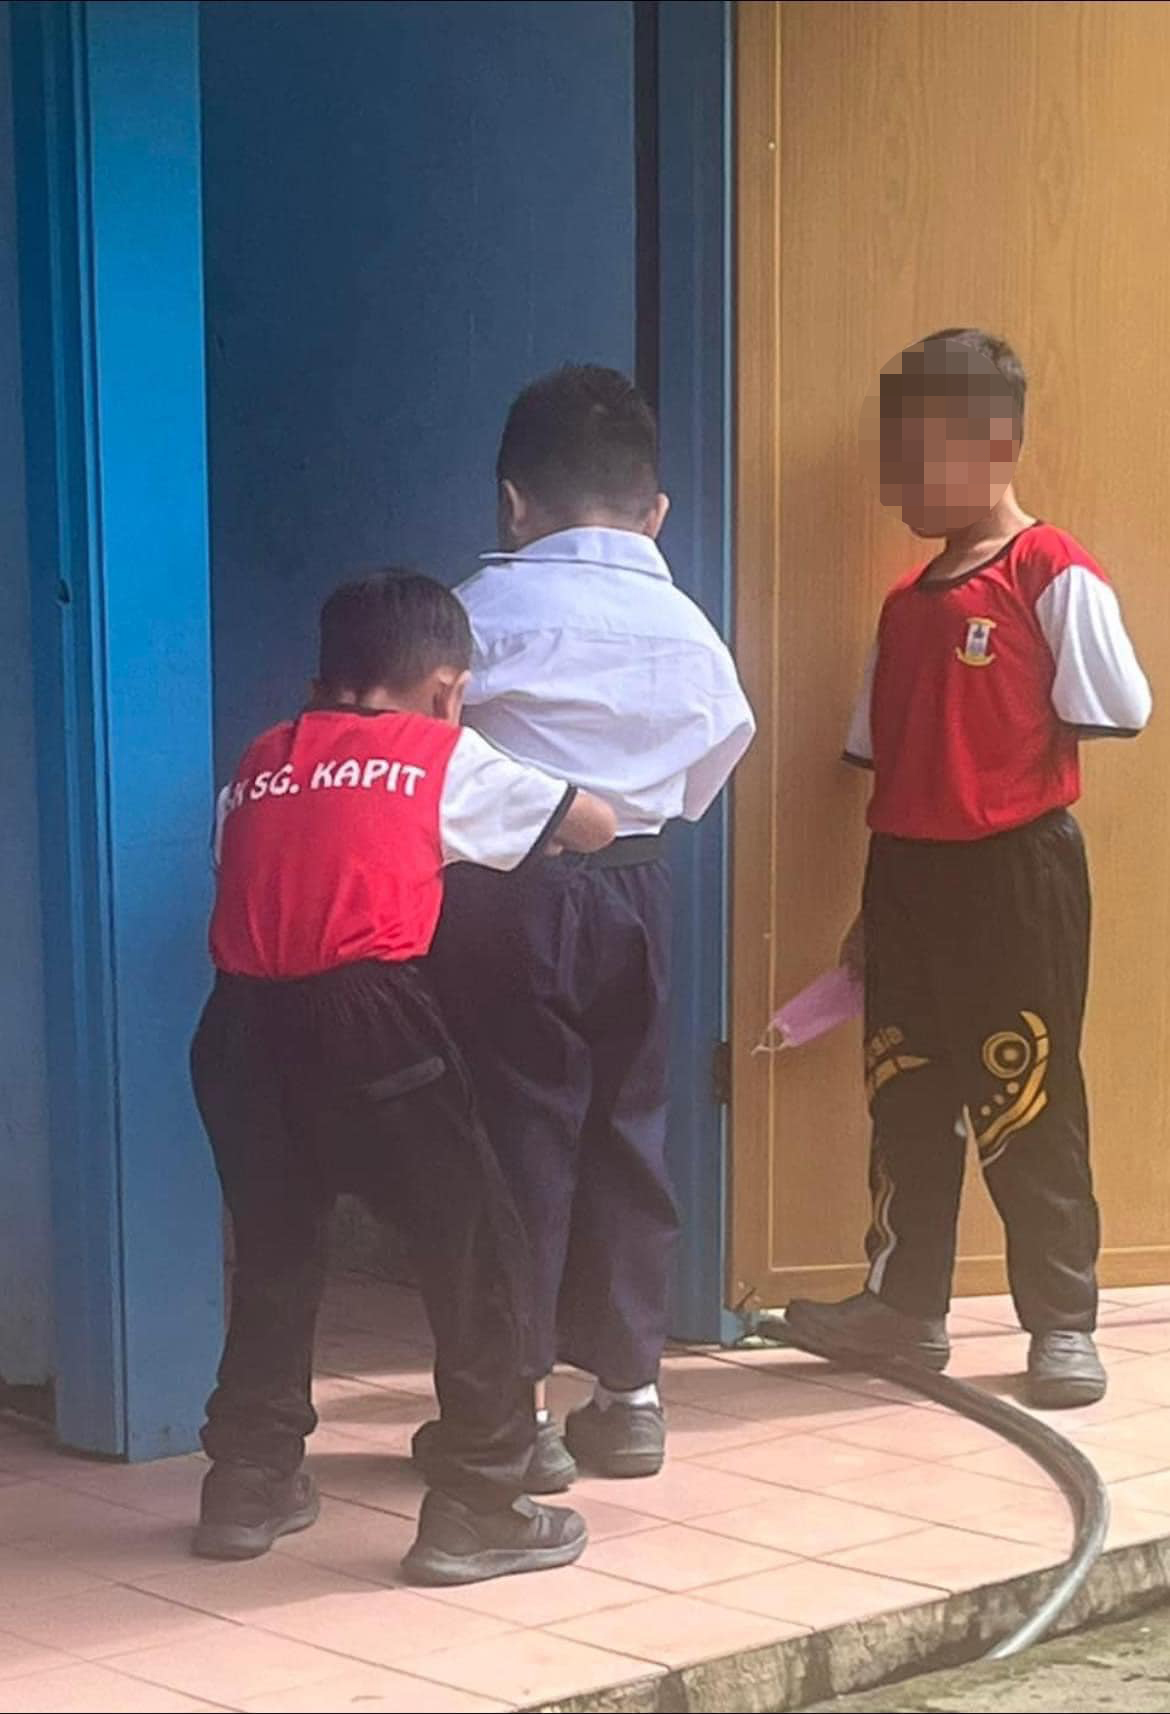 Two young boys were seen helping their friend with special needs to use the toilet. Image credit: Sylvester Ronny Pulene